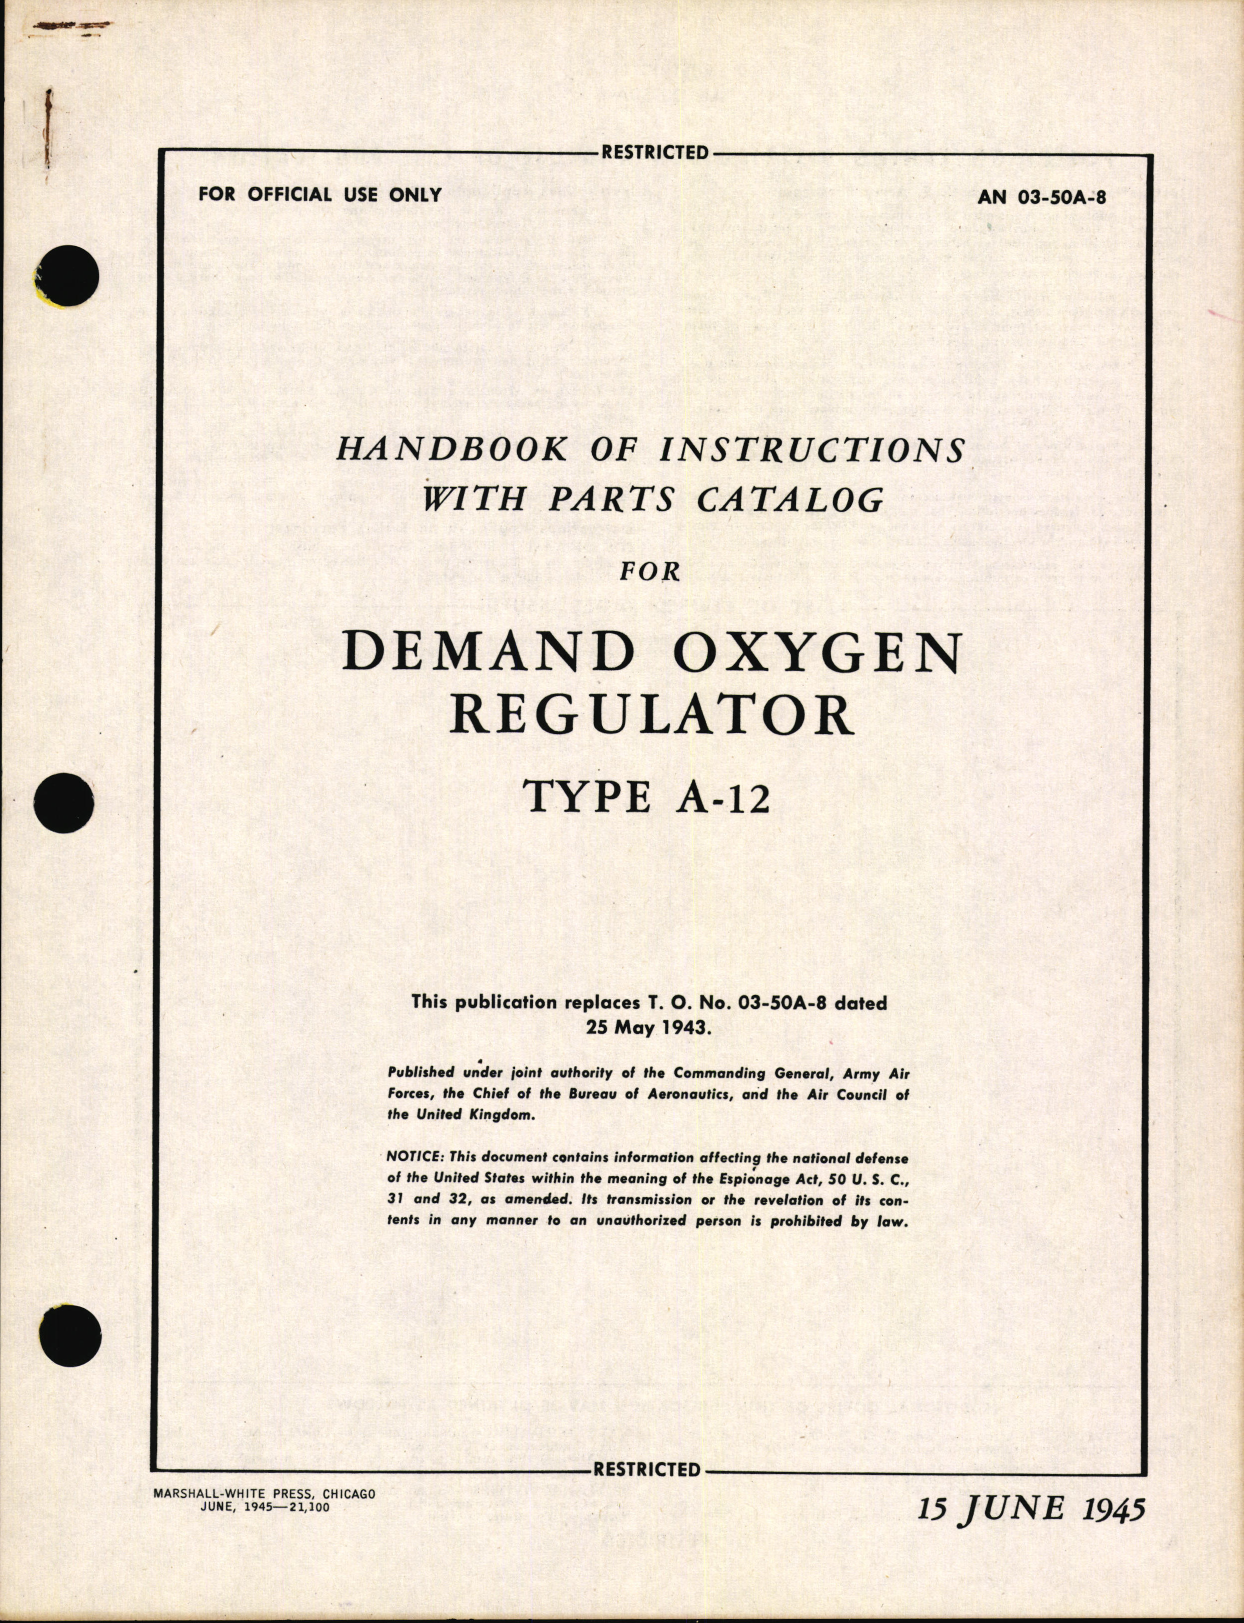 Sample page 1 from AirCorps Library document: Handbook of Instructions with Parts Catalog for Demand Oxygen Regulator Type A-12